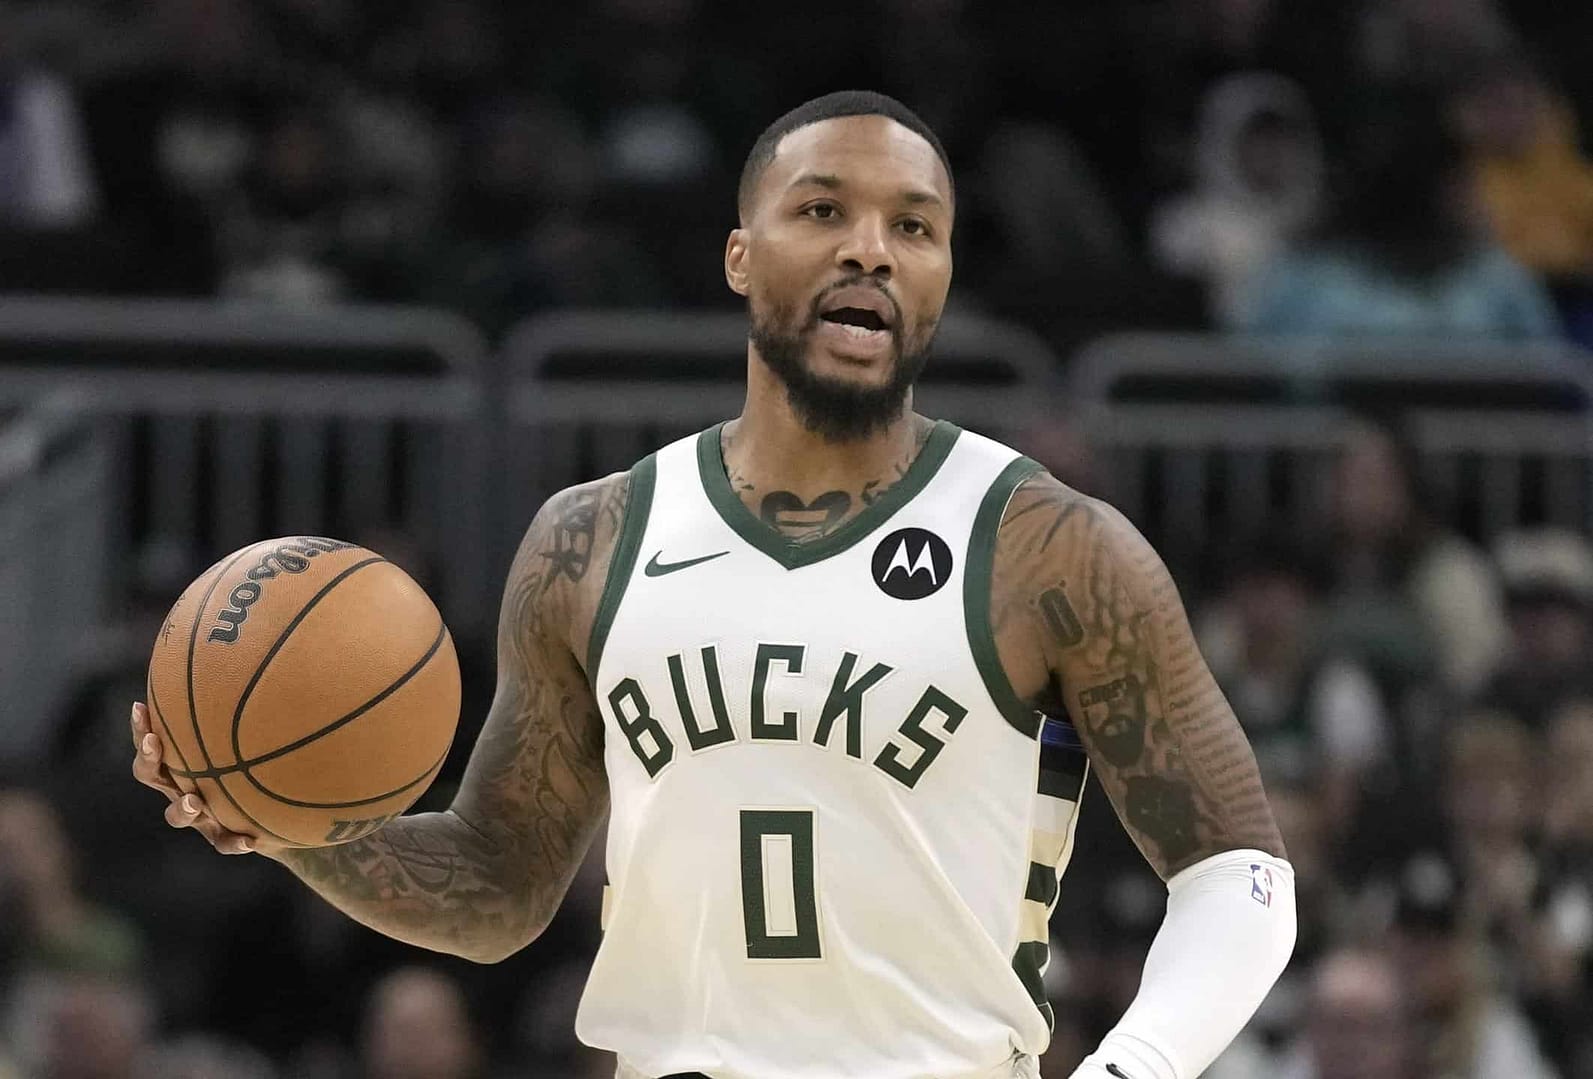 The best NBA player prop bets and picks today for Thursday, March 28, include wagers on Damian Lillard and Giannis Antetokounmpo...